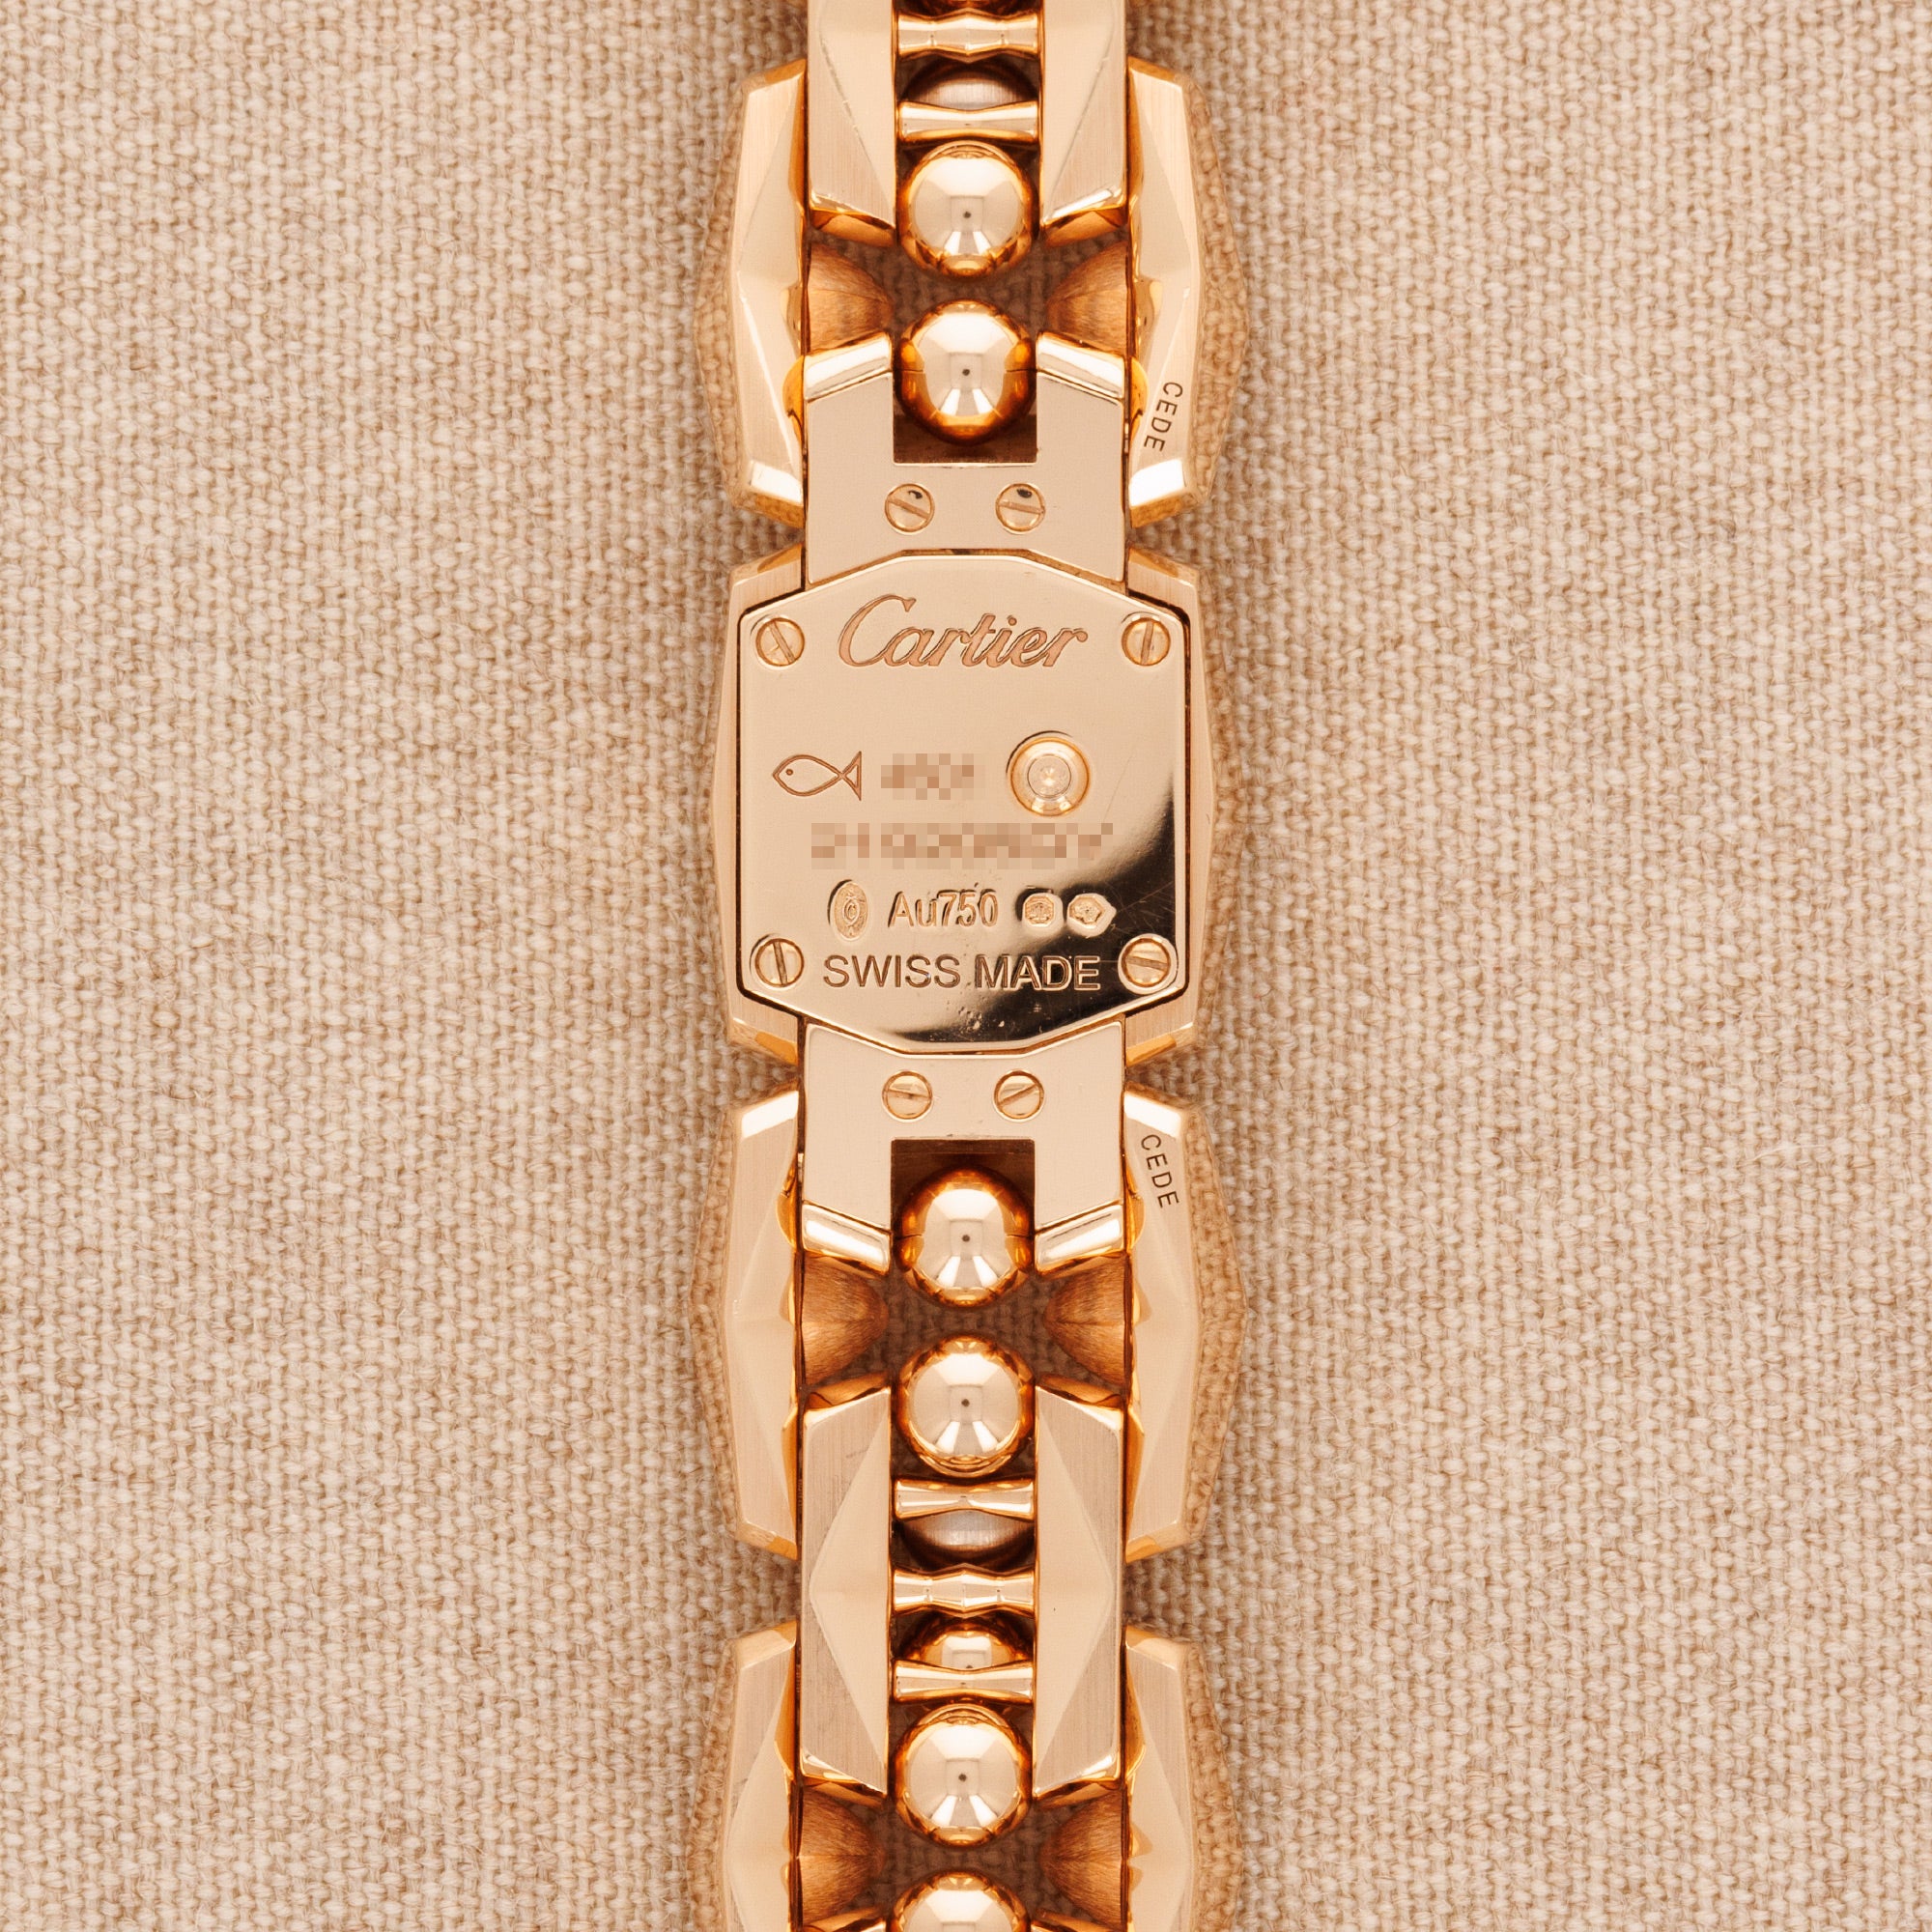 Cartier - Cartier Rose Gold Clash [Un]Limited Watch Ref. WGMB0003 - The Keystone Watches